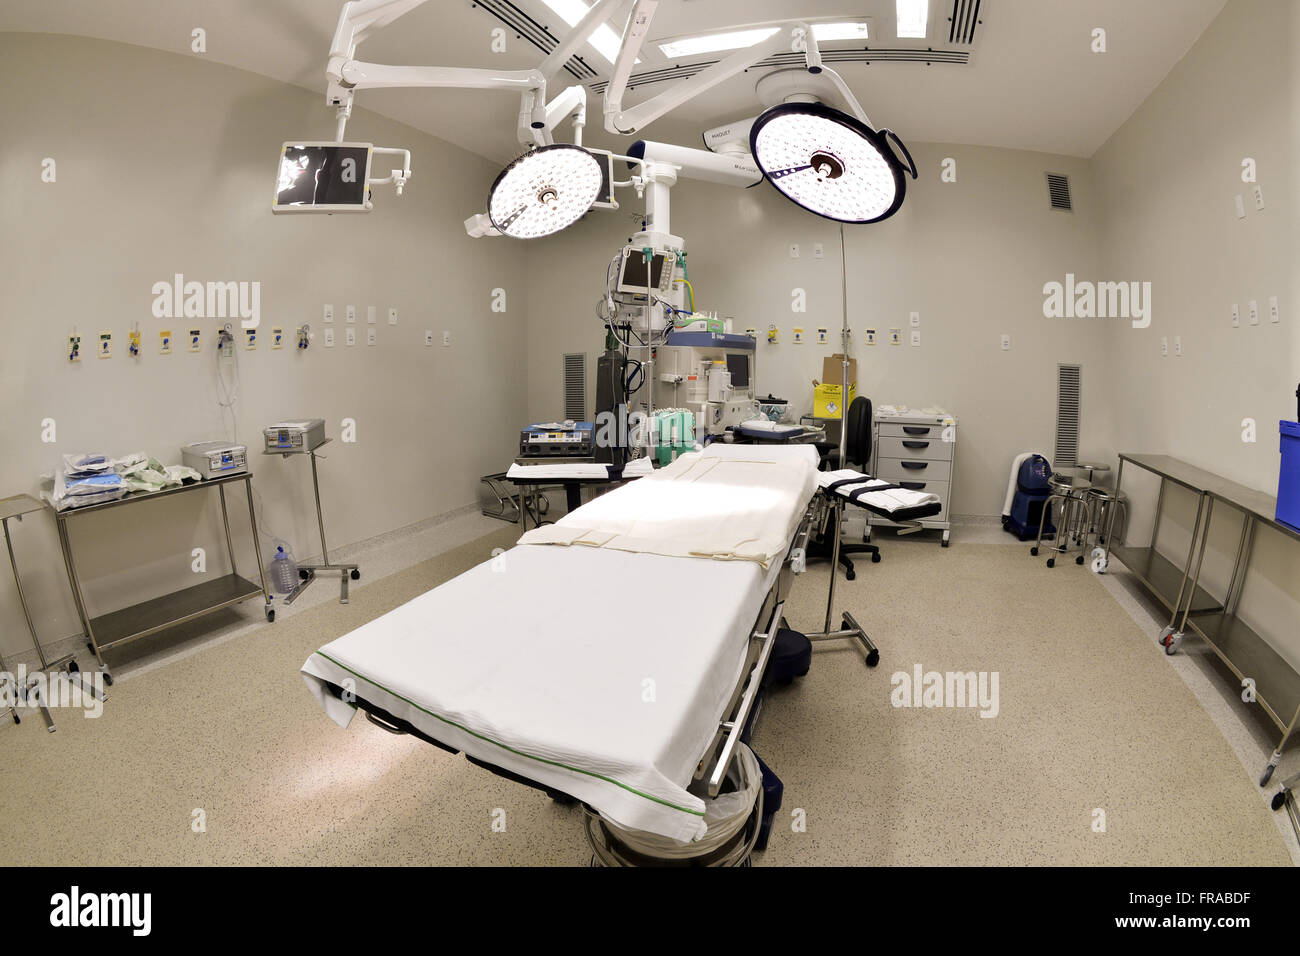 Surgical center in private hospital Stock Photo